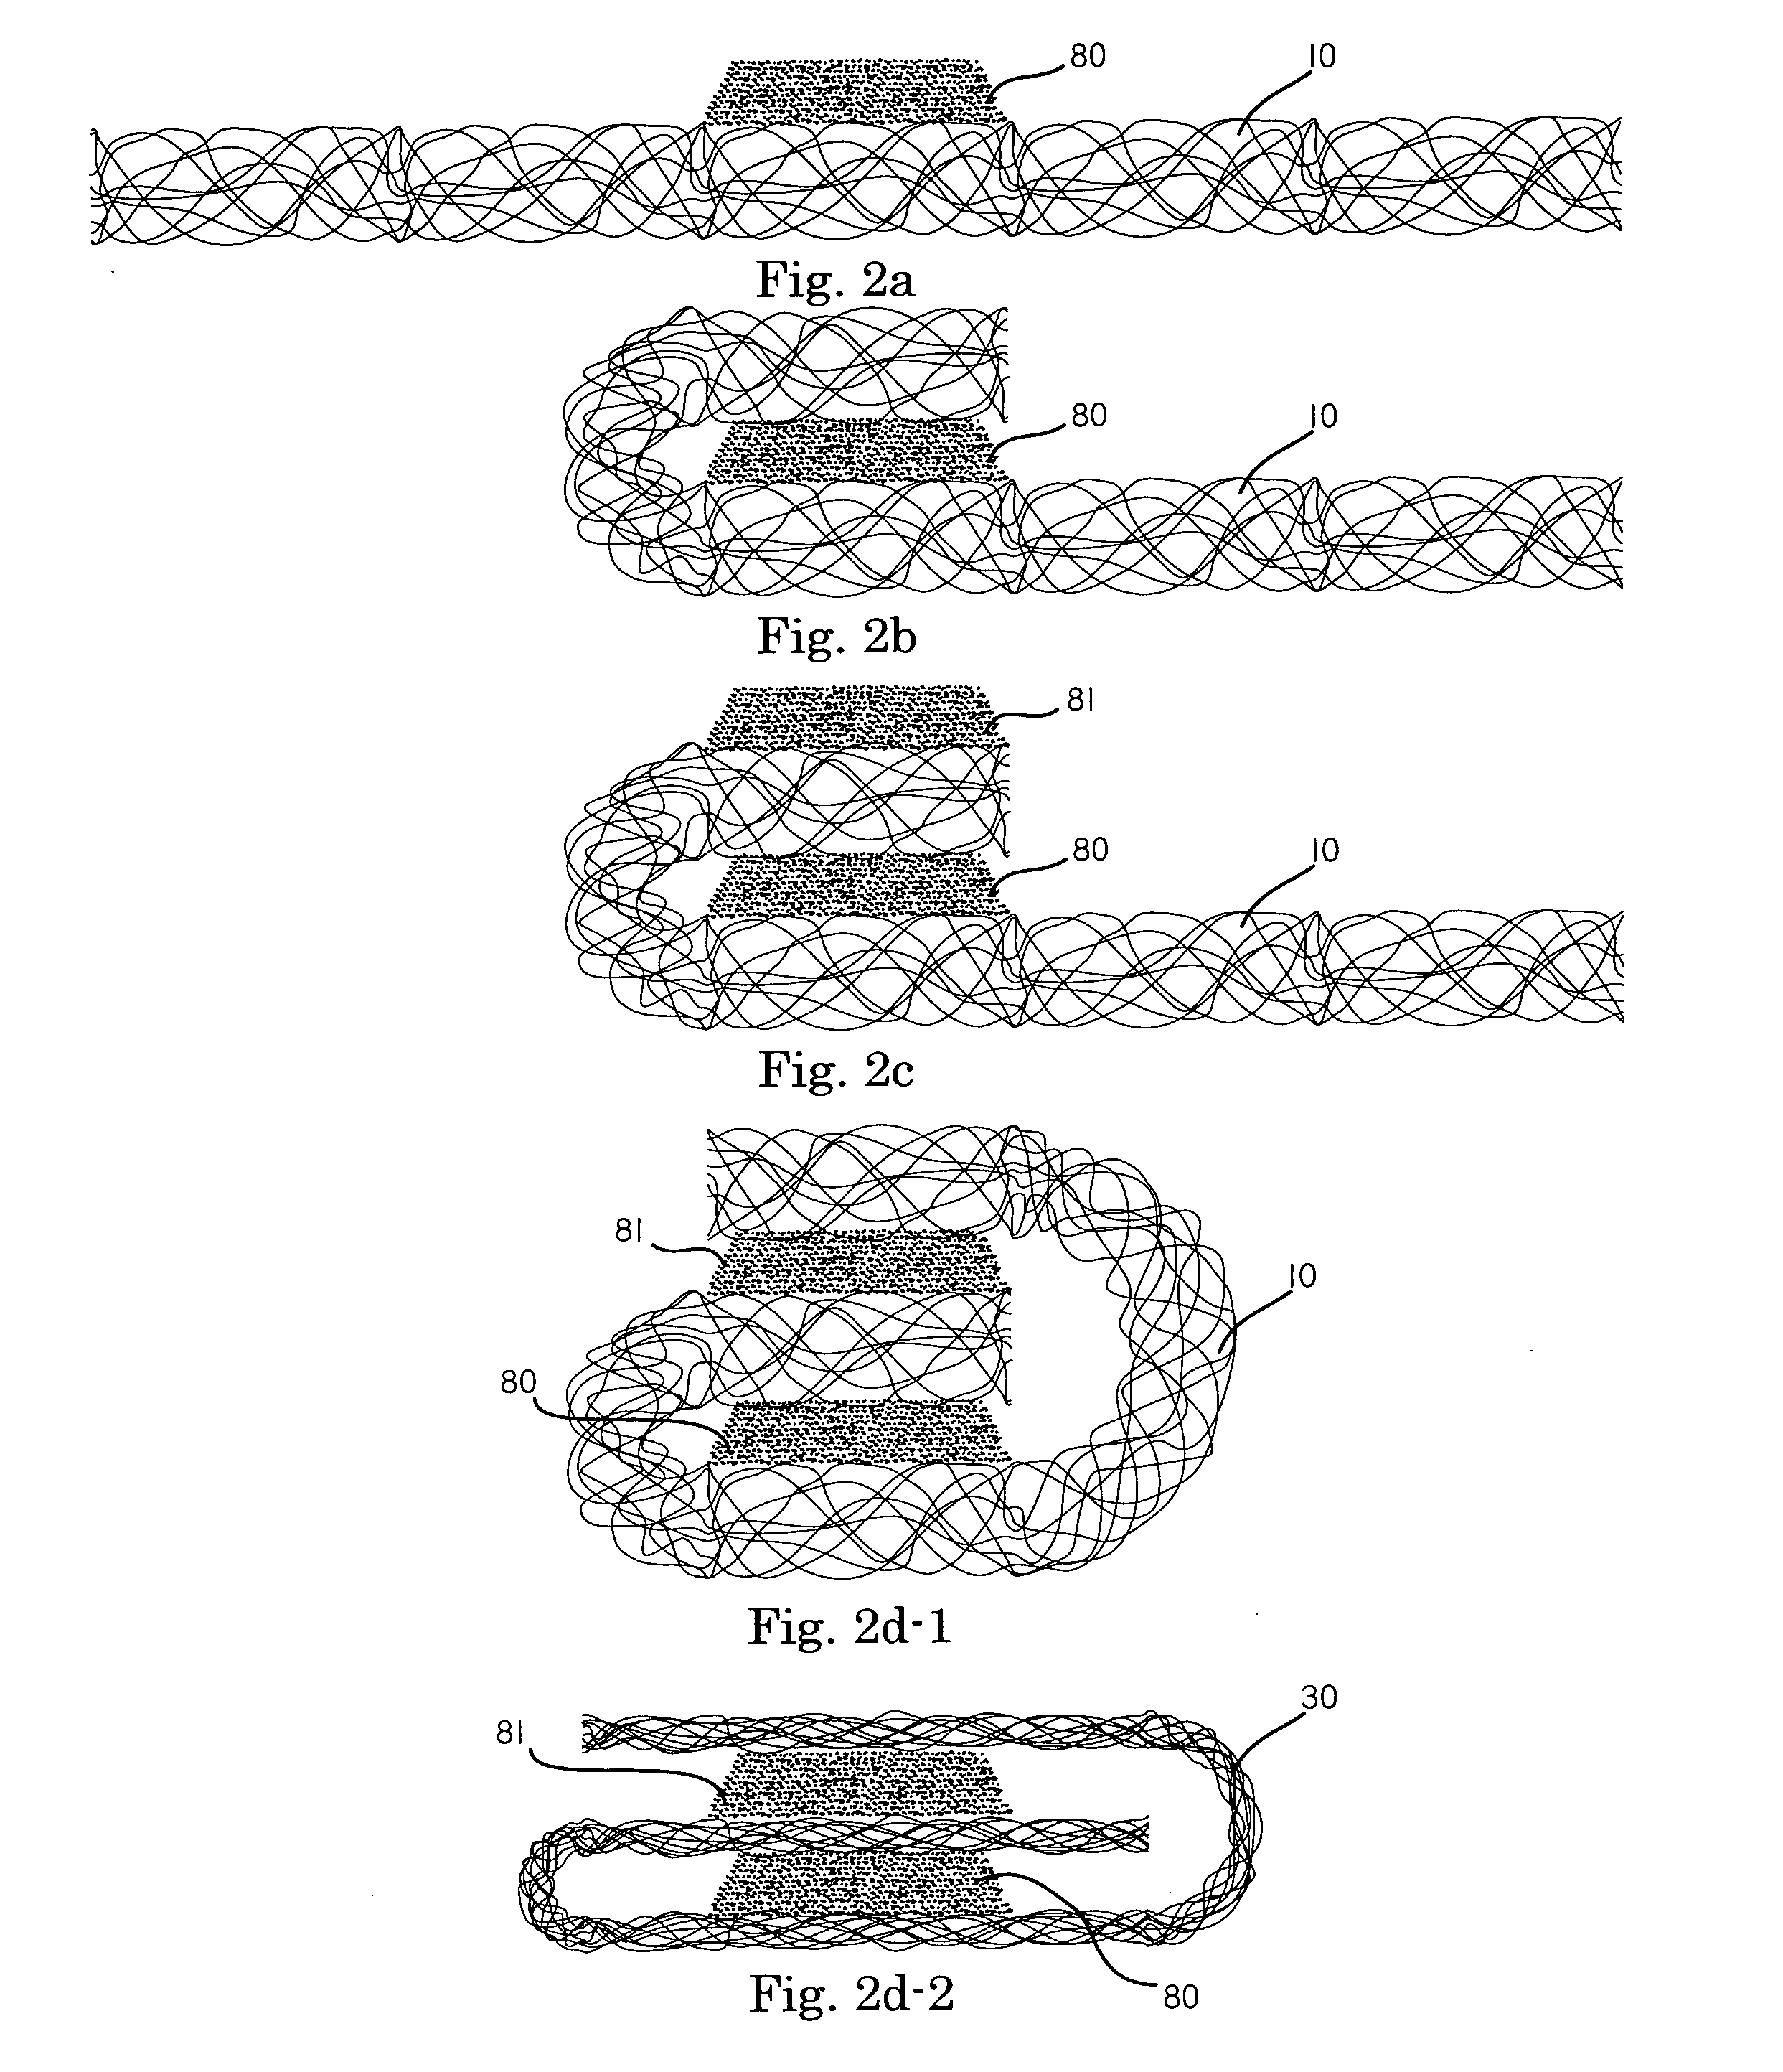 Planar-formed absorbent core structures